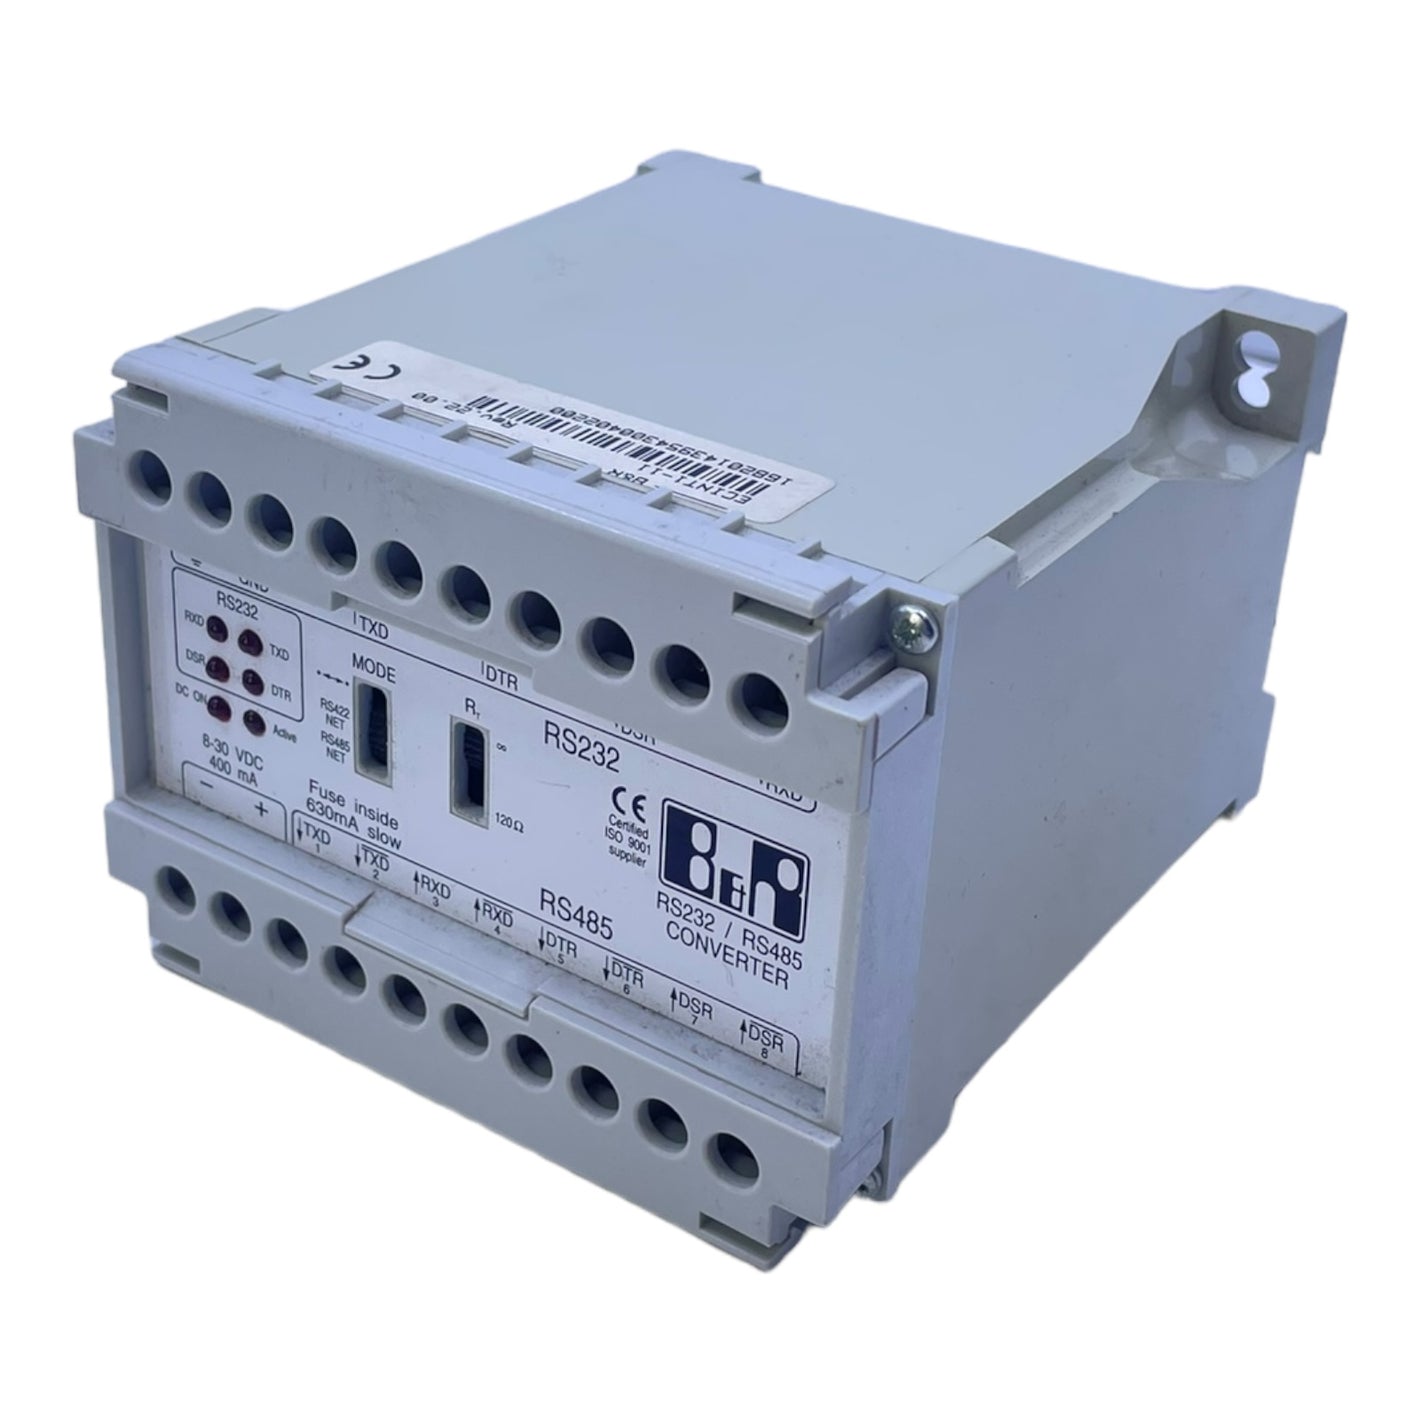 B&amp;R ECINT1-11 Interface converter for industrial use B&amp;R ECINT1-11